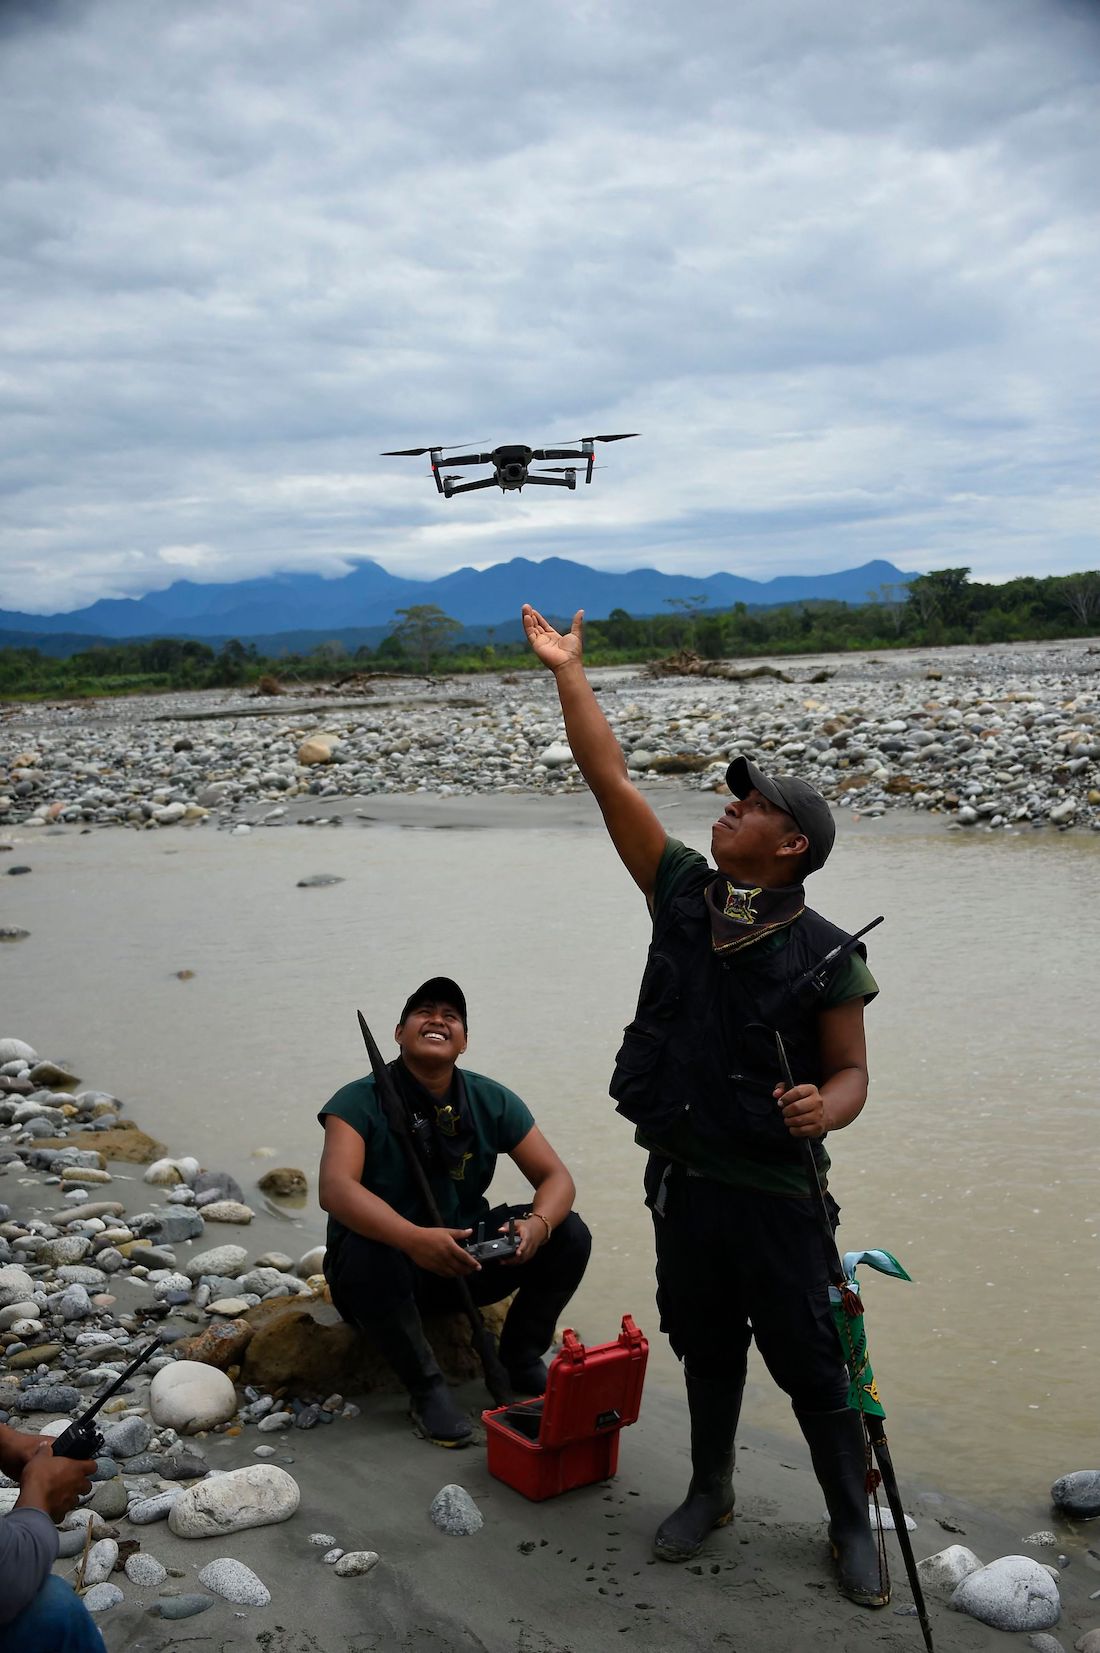 a man holds up his hand doward a small drone plane while another sits on the ground looking up